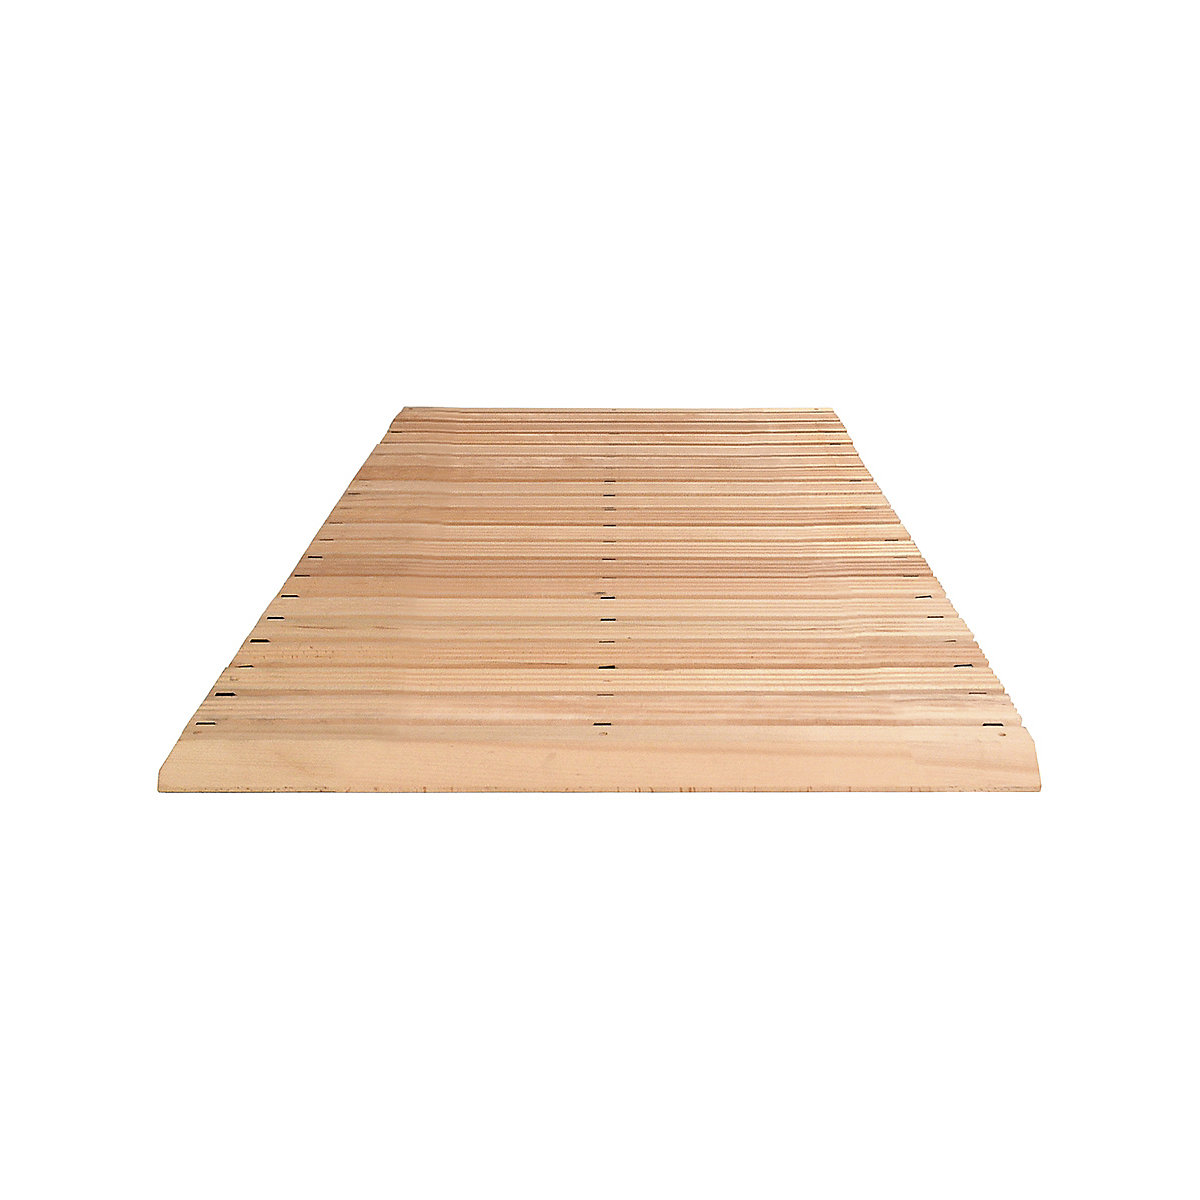 Wooden safety grid, per metre, with bevelled edges on 3 sides, width 1000 mm